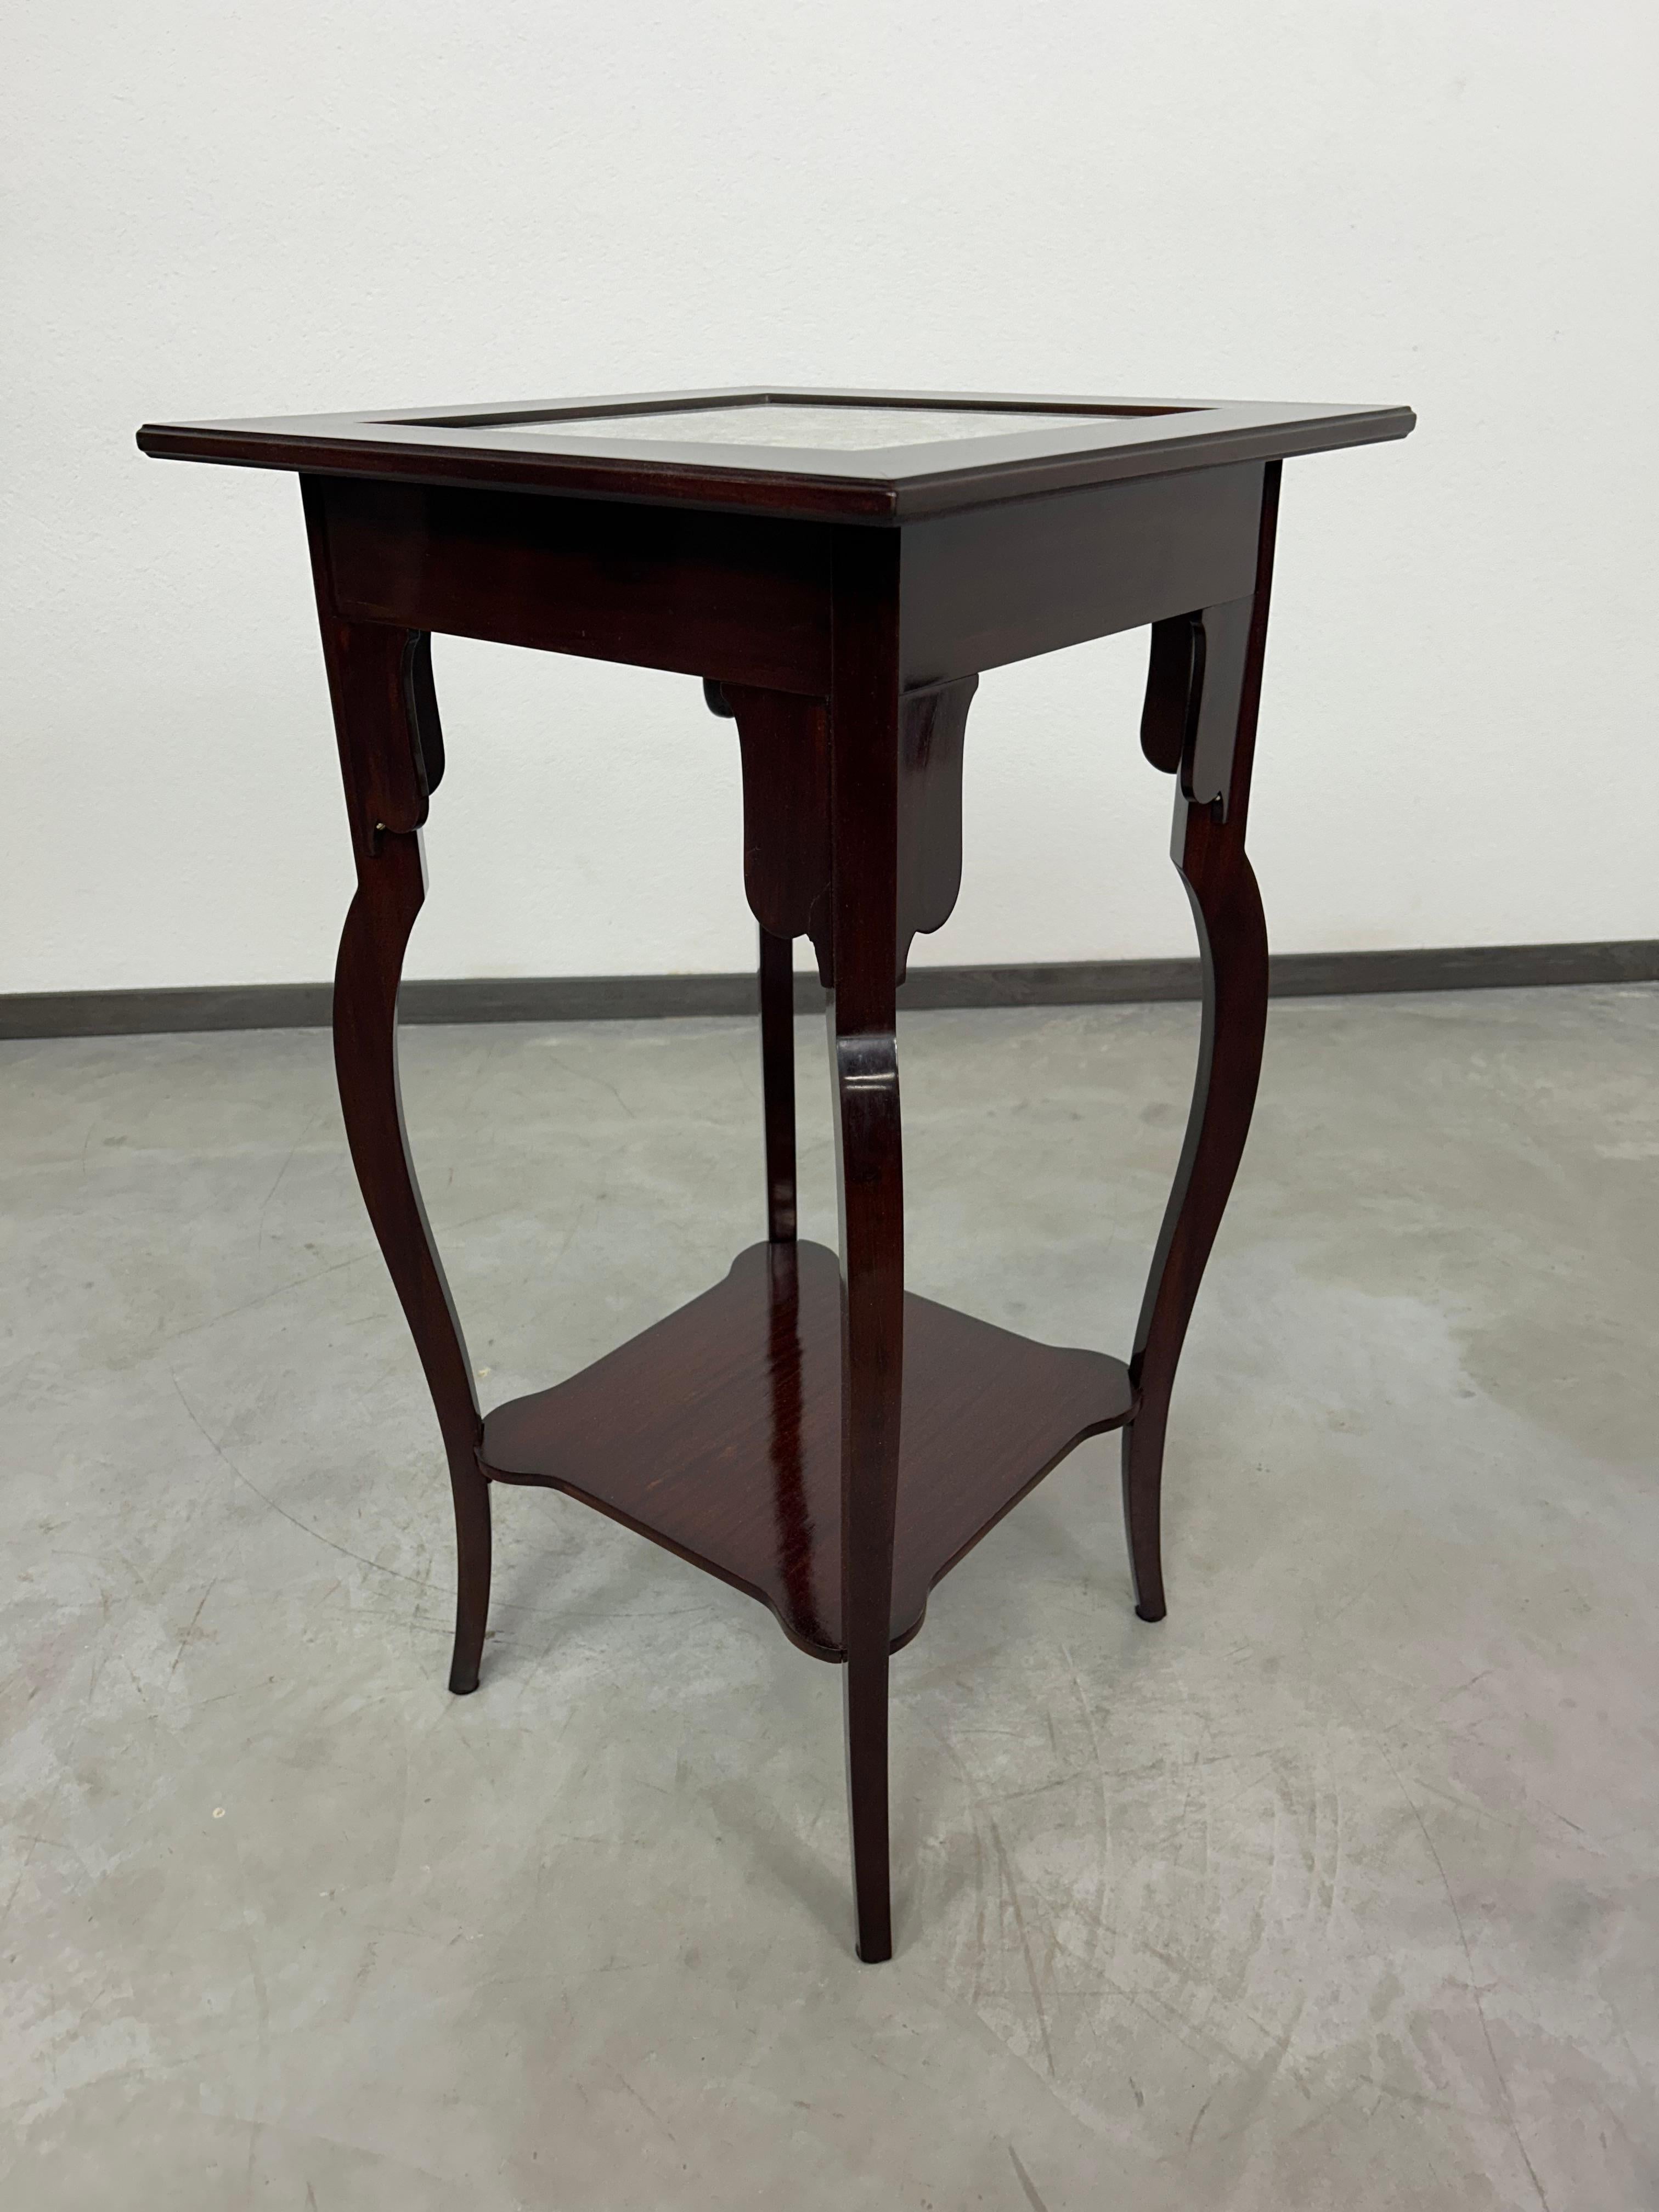 Secession mahogany side table. Professionally stained and repolished.